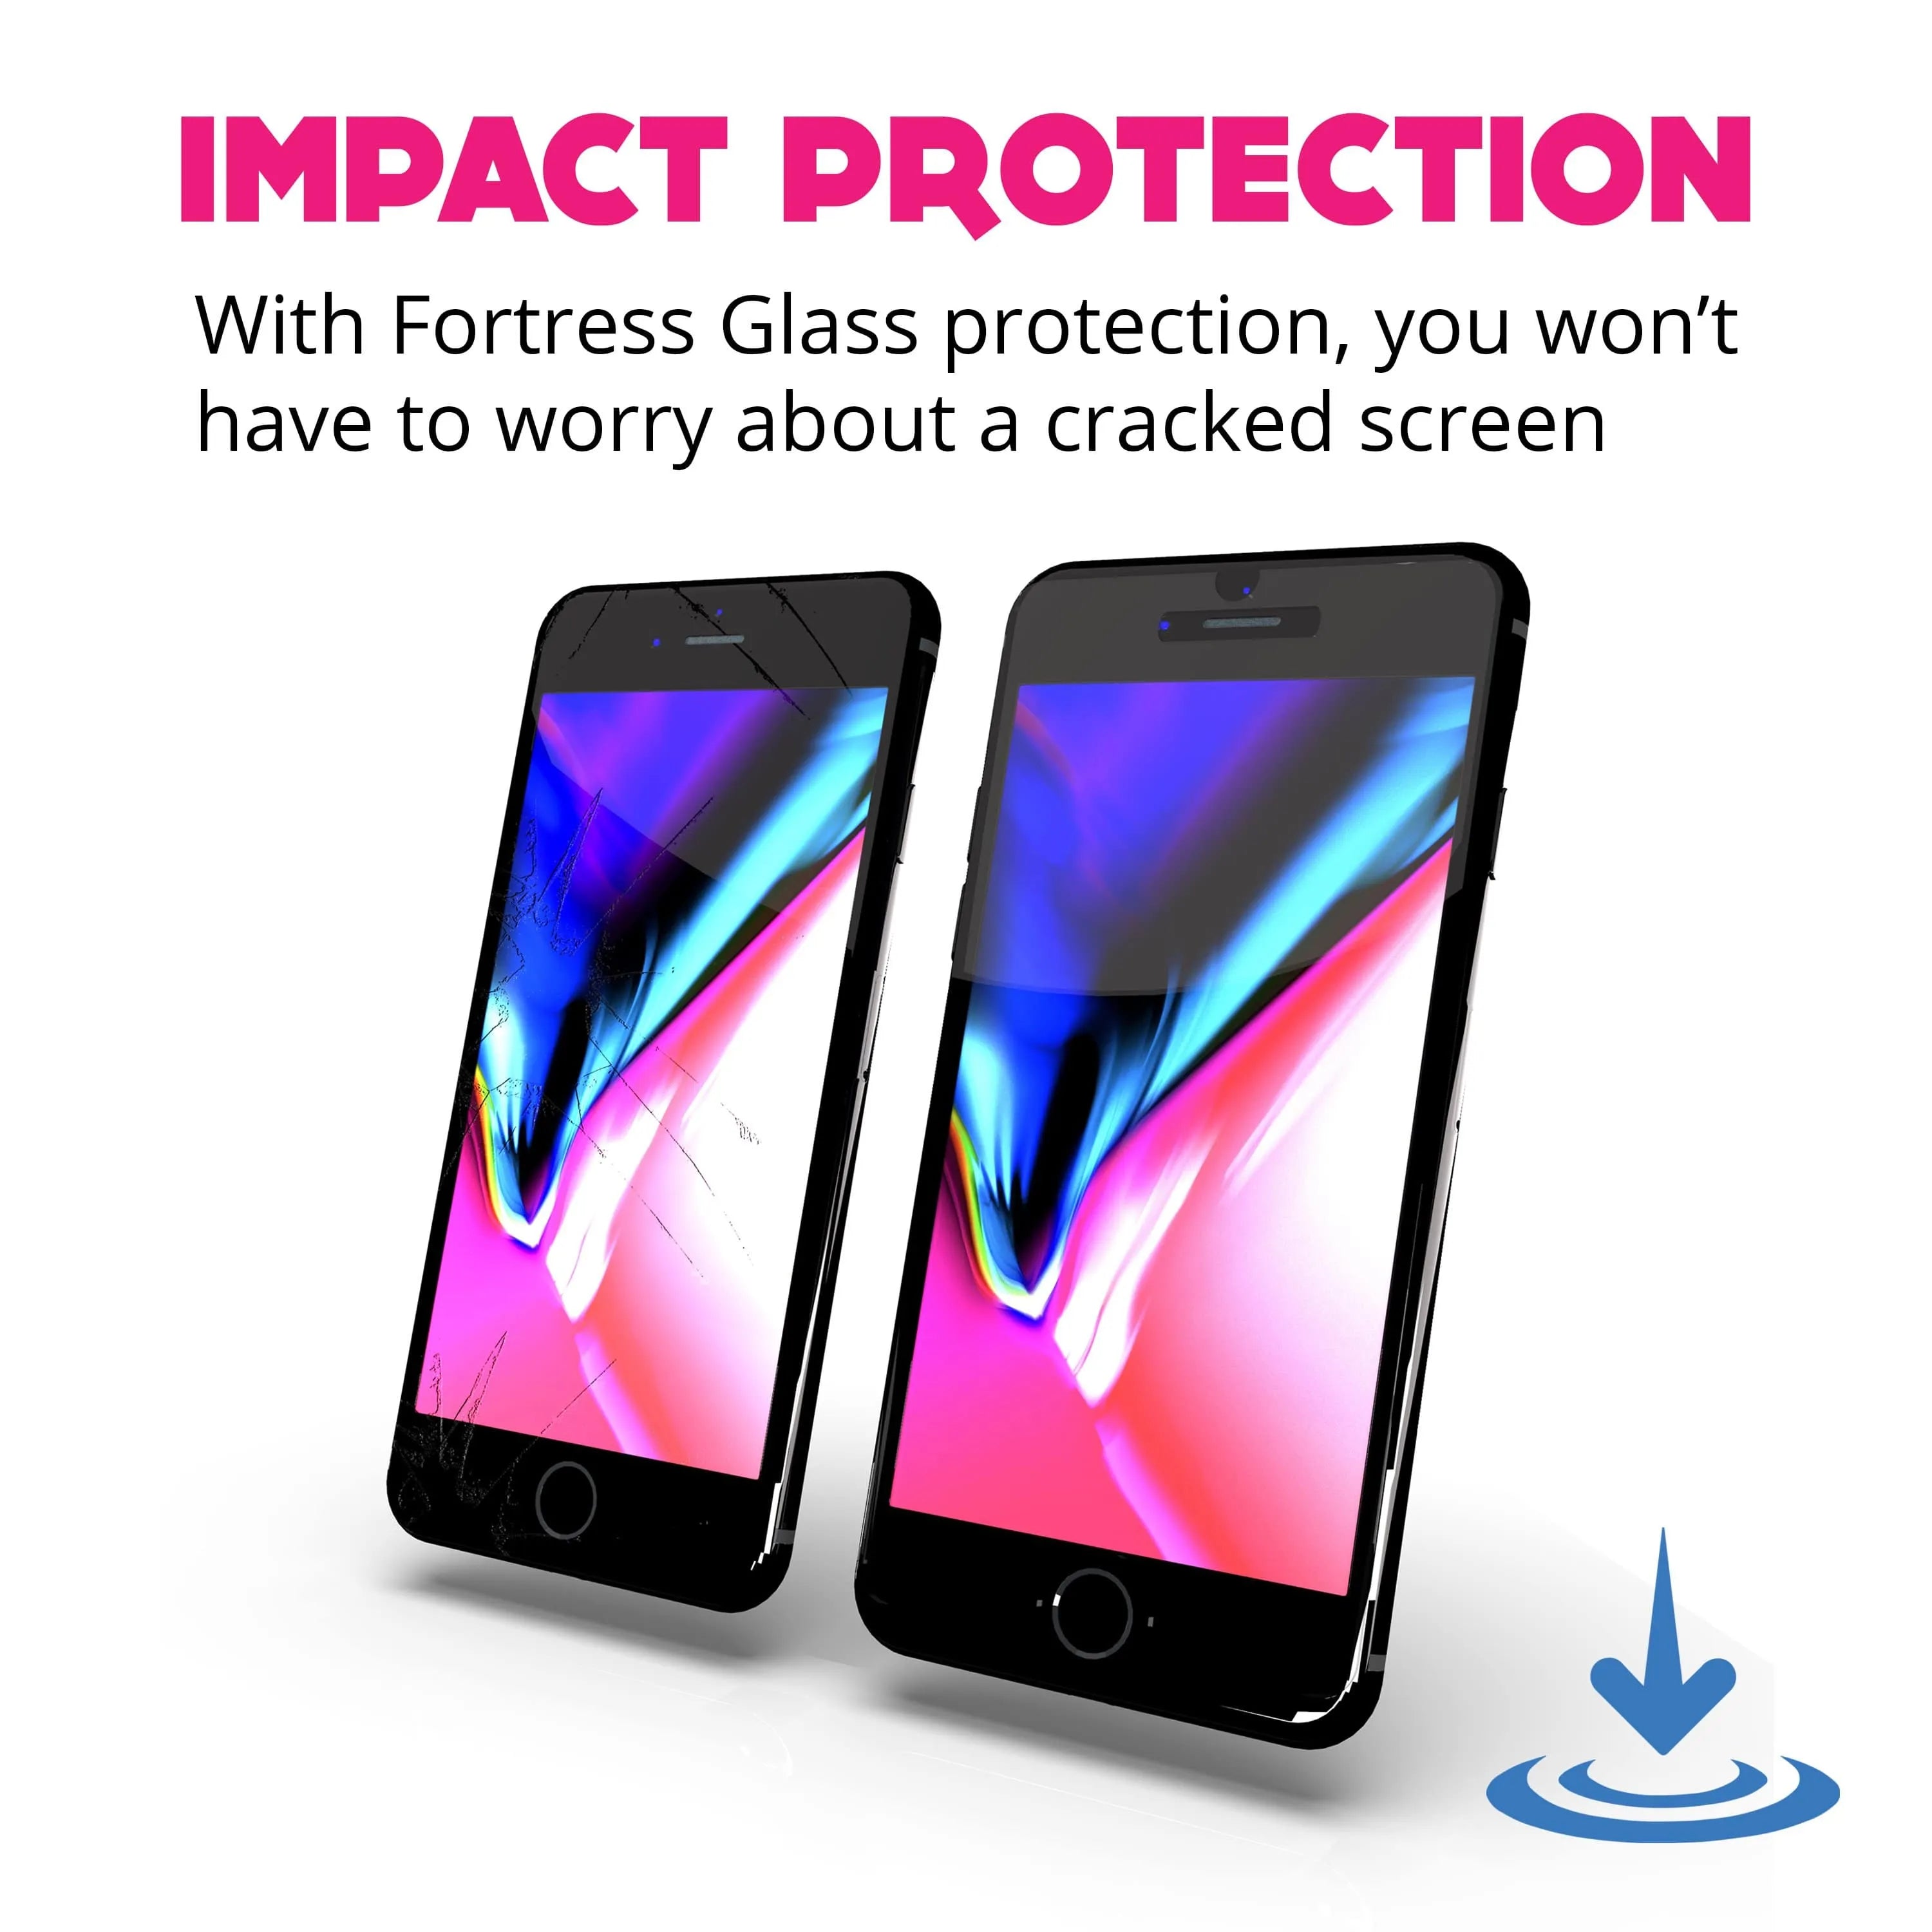 Fortress iPhone SE/8/7 Screen Protector - $200 Device Coverage  Scooch Screen Protector